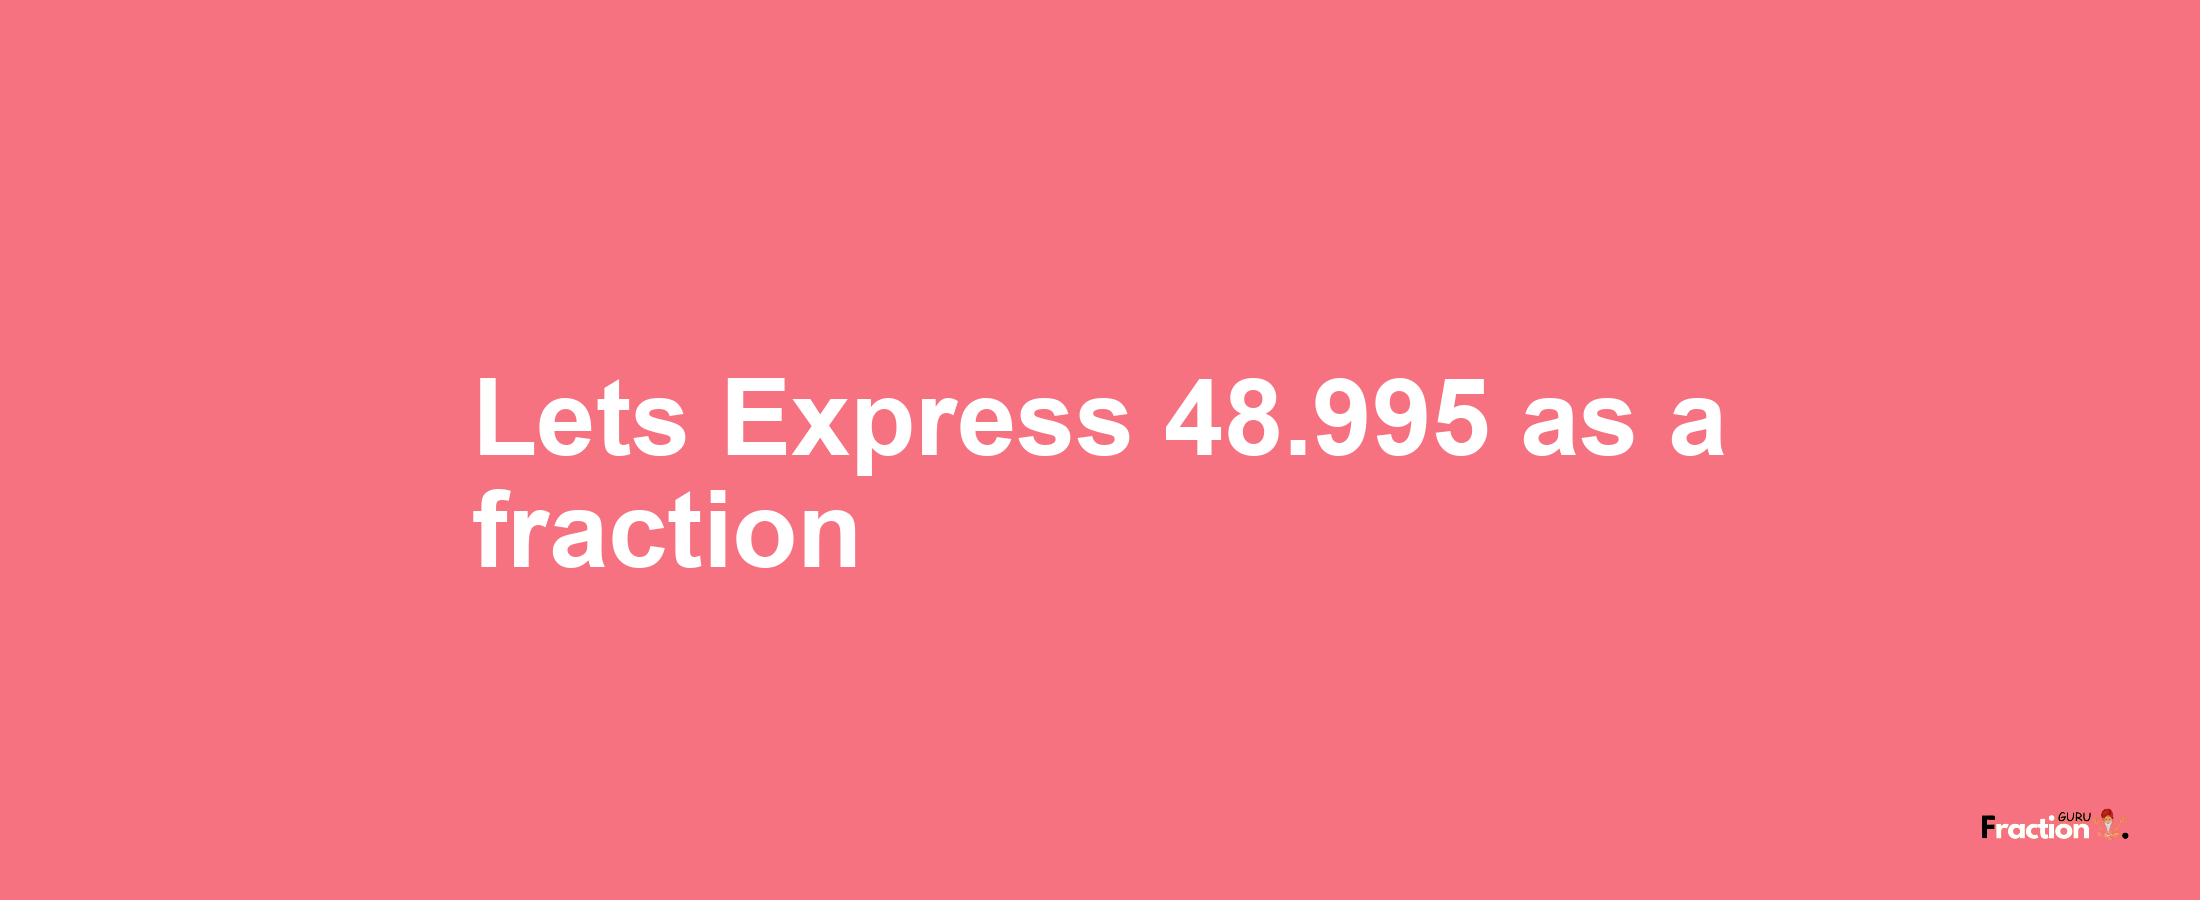 Lets Express 48.995 as afraction